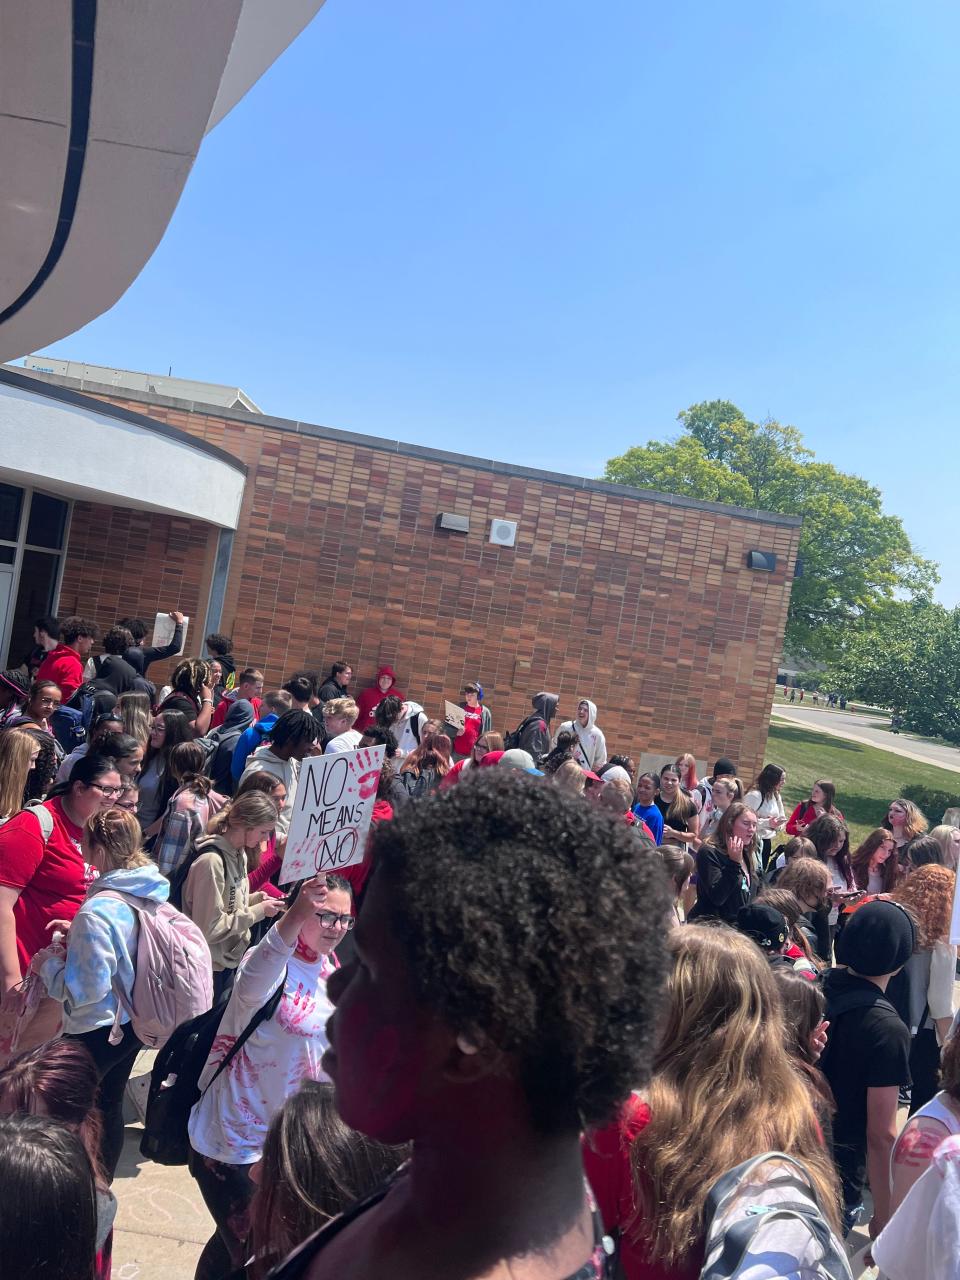 Students at Port Huron High School participating in a walkout that is aimed at sexual assault reform on June 9, 2023.